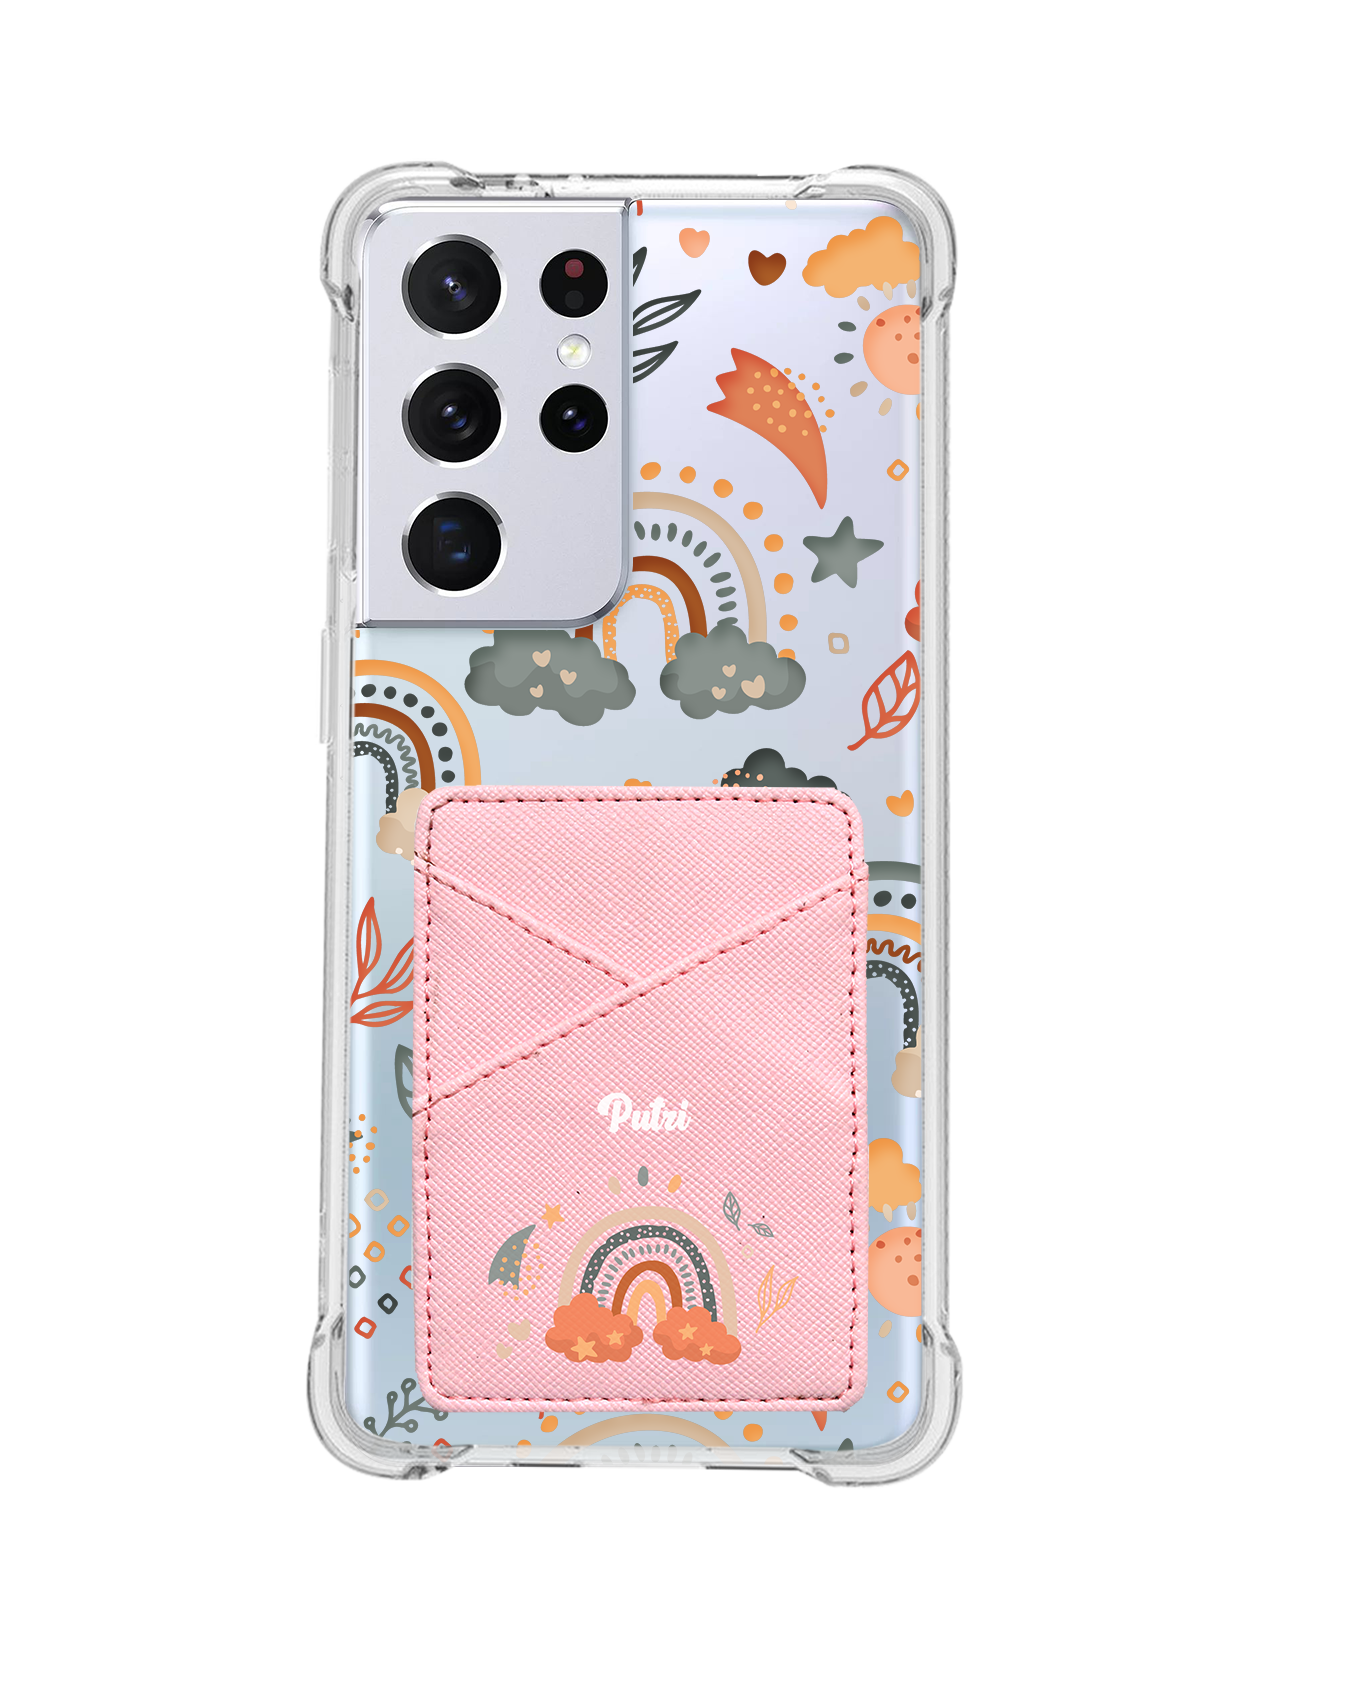 Android Phone Wallet Case - Boho 2.0